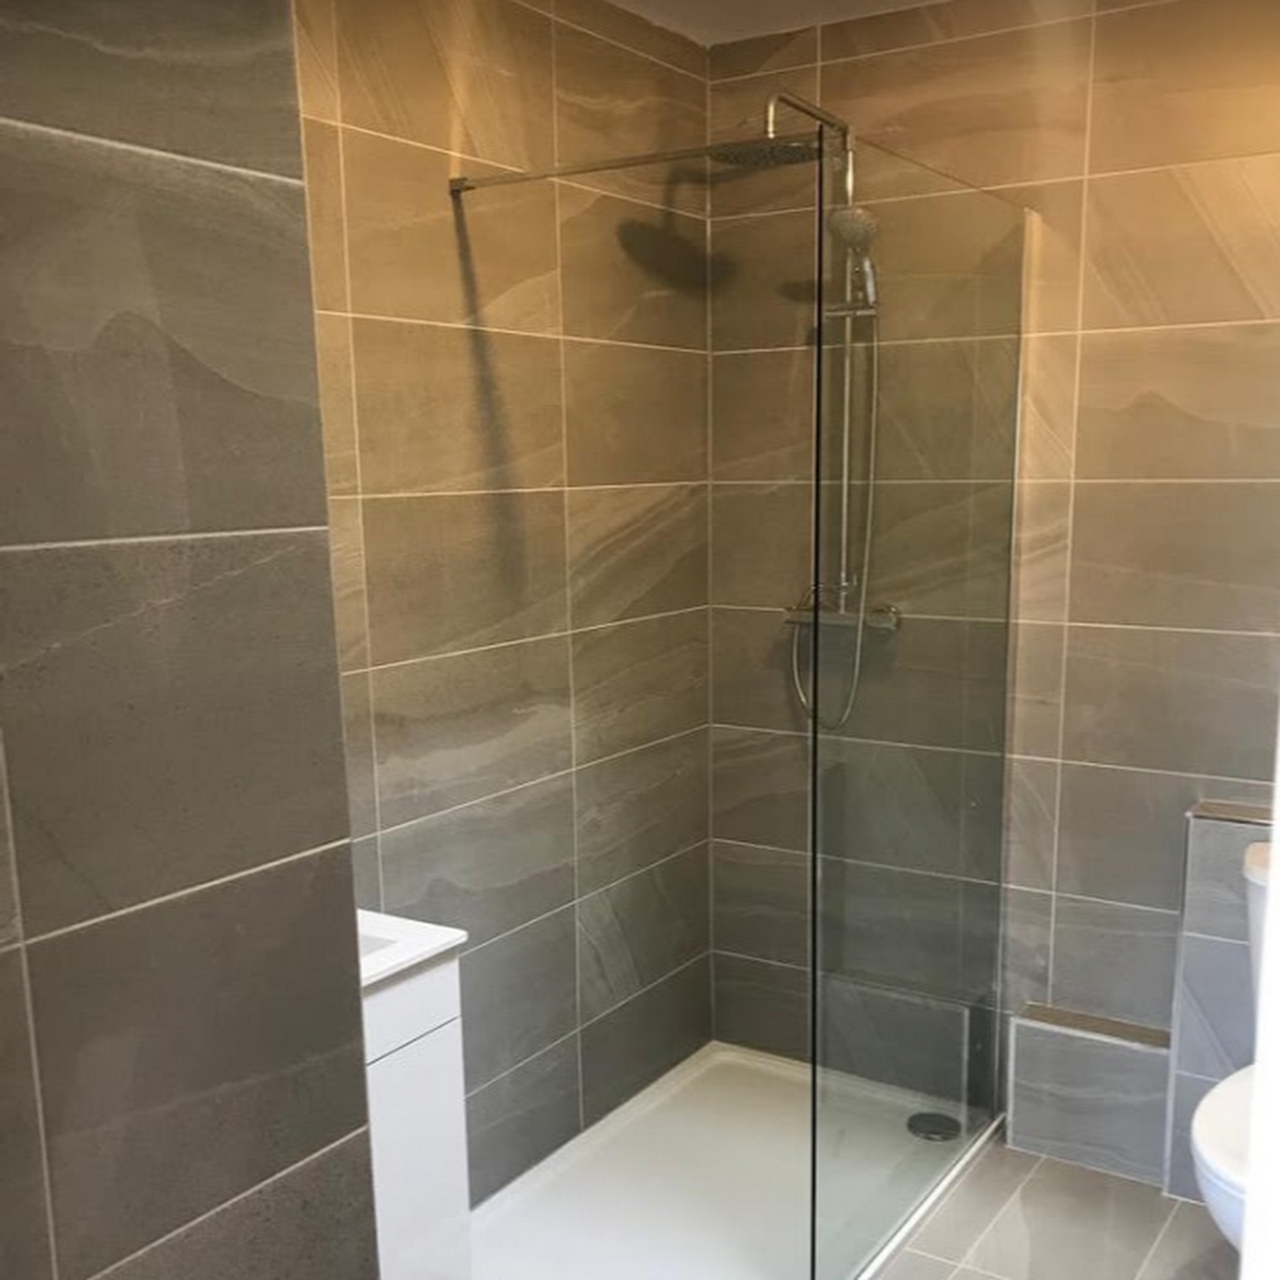 Stylist Bathroom renovations in Firhouse- CSBS services